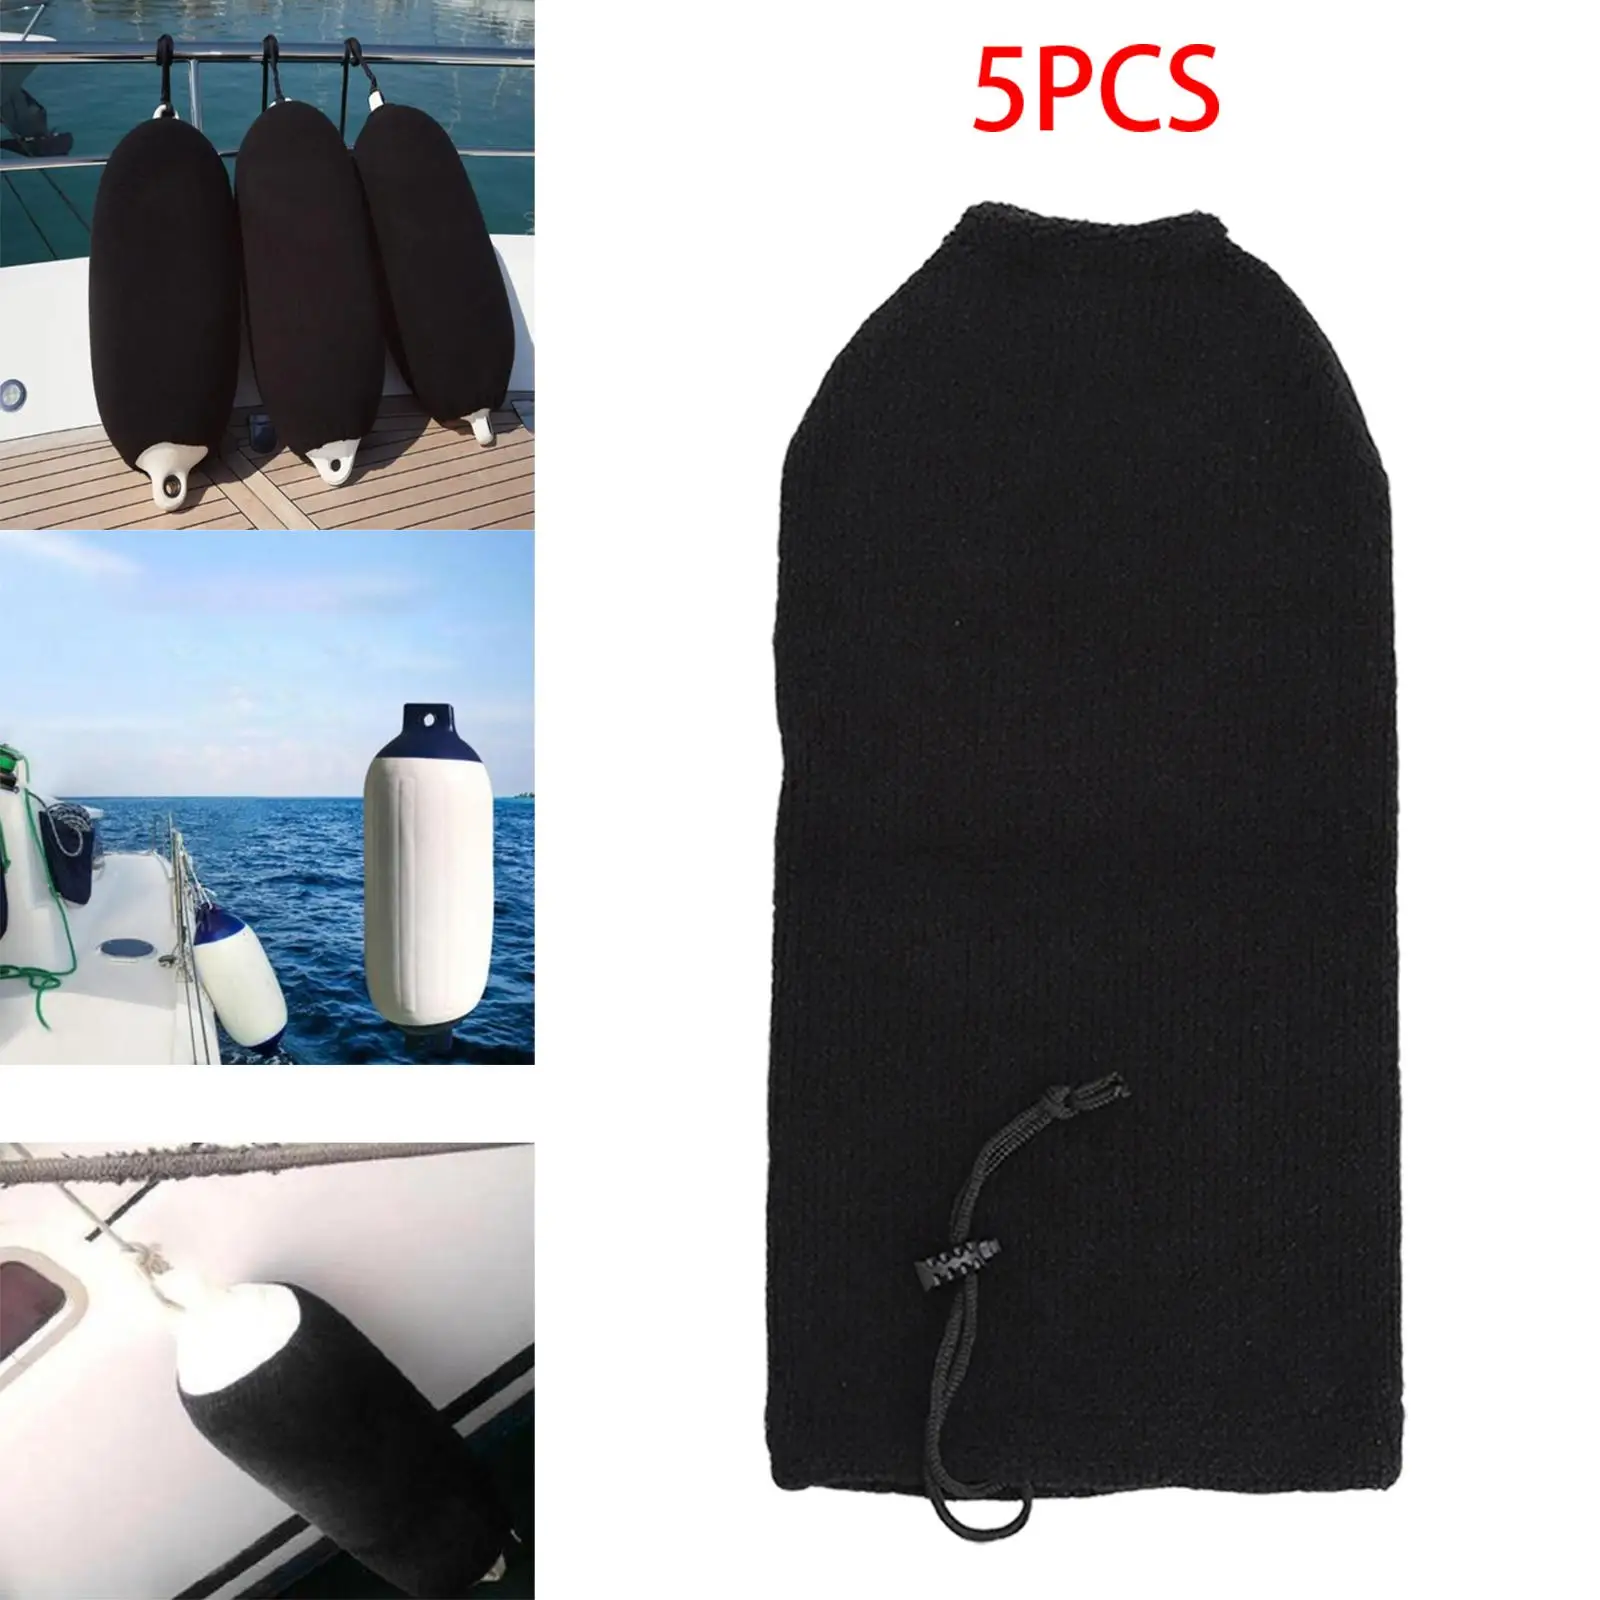 5 Cover, Soft Acrylic Ball Sleeve Anti Collision Woven Windscreen Supplies Protector Fit for Marine Yacht Salt Protection